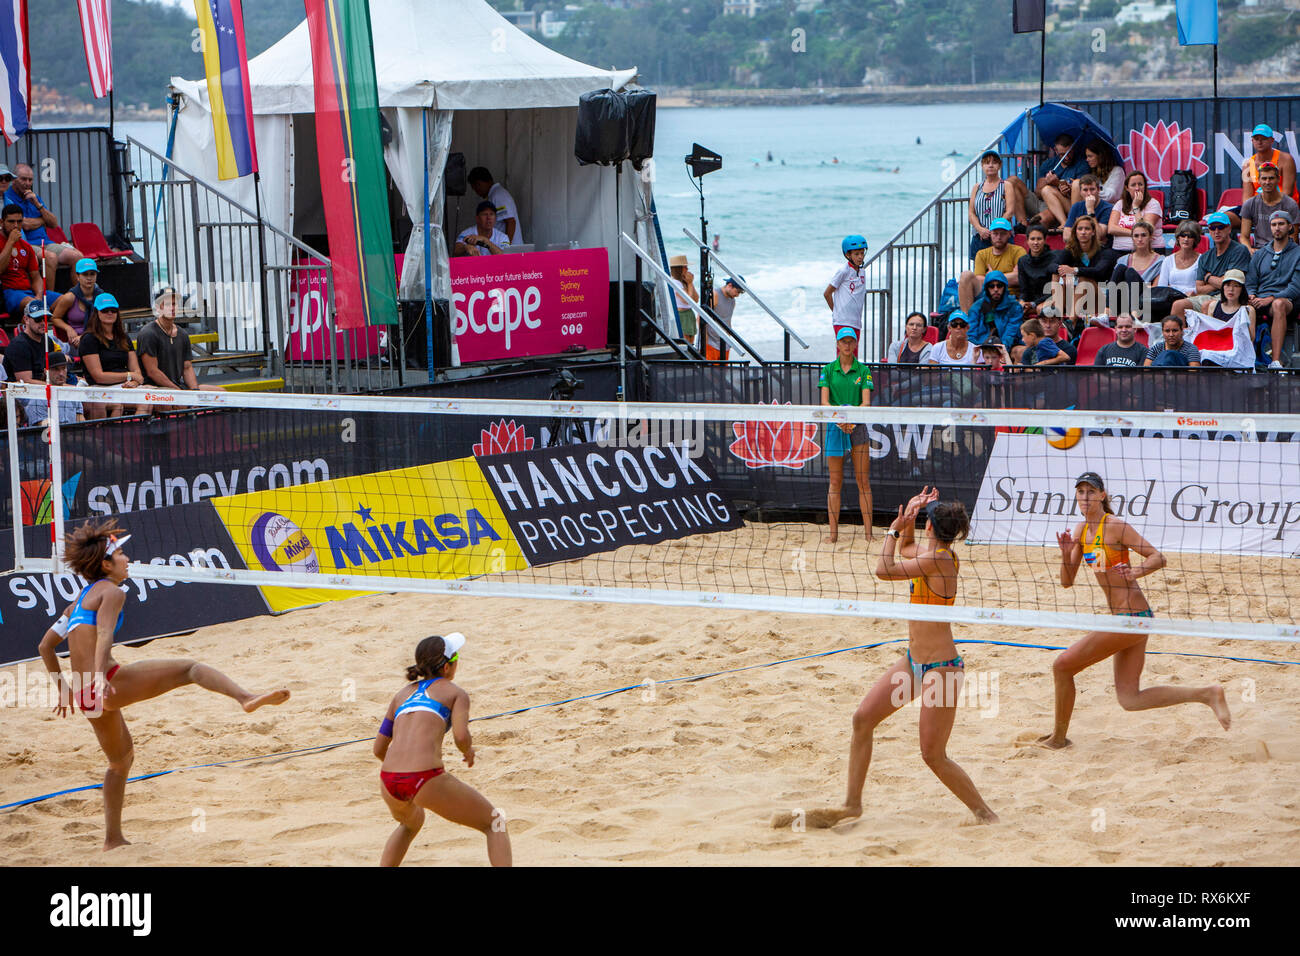 Sydney, Australia, 9th Mar 2019. Japan v Australia in the womens quarter finals at Volleyfest 2019, a Fédération Internationale de Volleyball FIVB Beach Volleyball World Tour tournament being held for the 5th time at Manly Beach in Sydney,Australia. Saturday March 9th 2019. Credit: martin berry/Alamy Live News Stock Photo